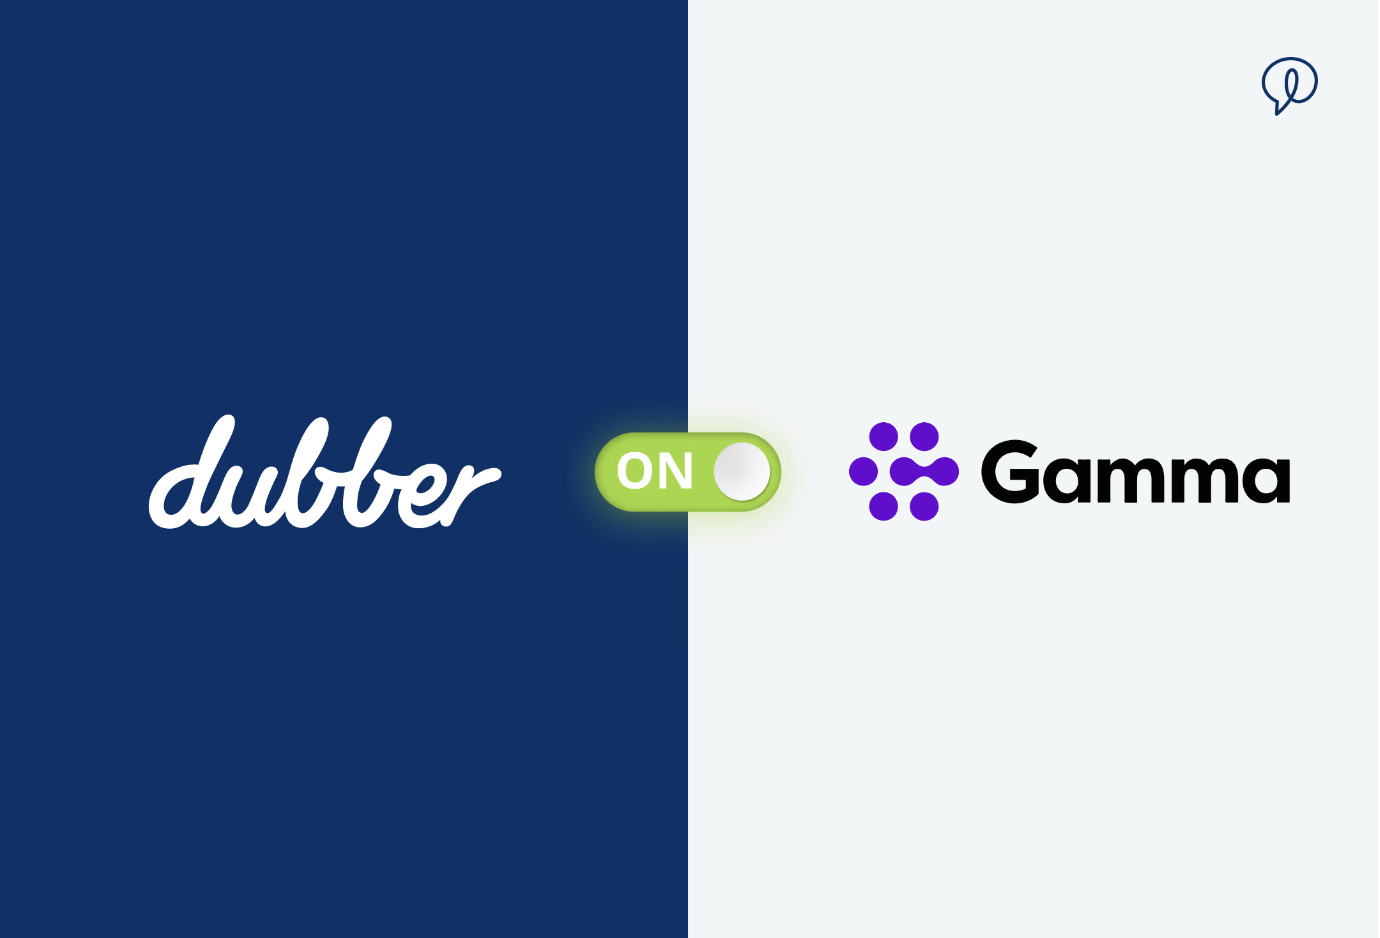 Gamma selects Dubber for Intelligent Recording on Microsoft Teams